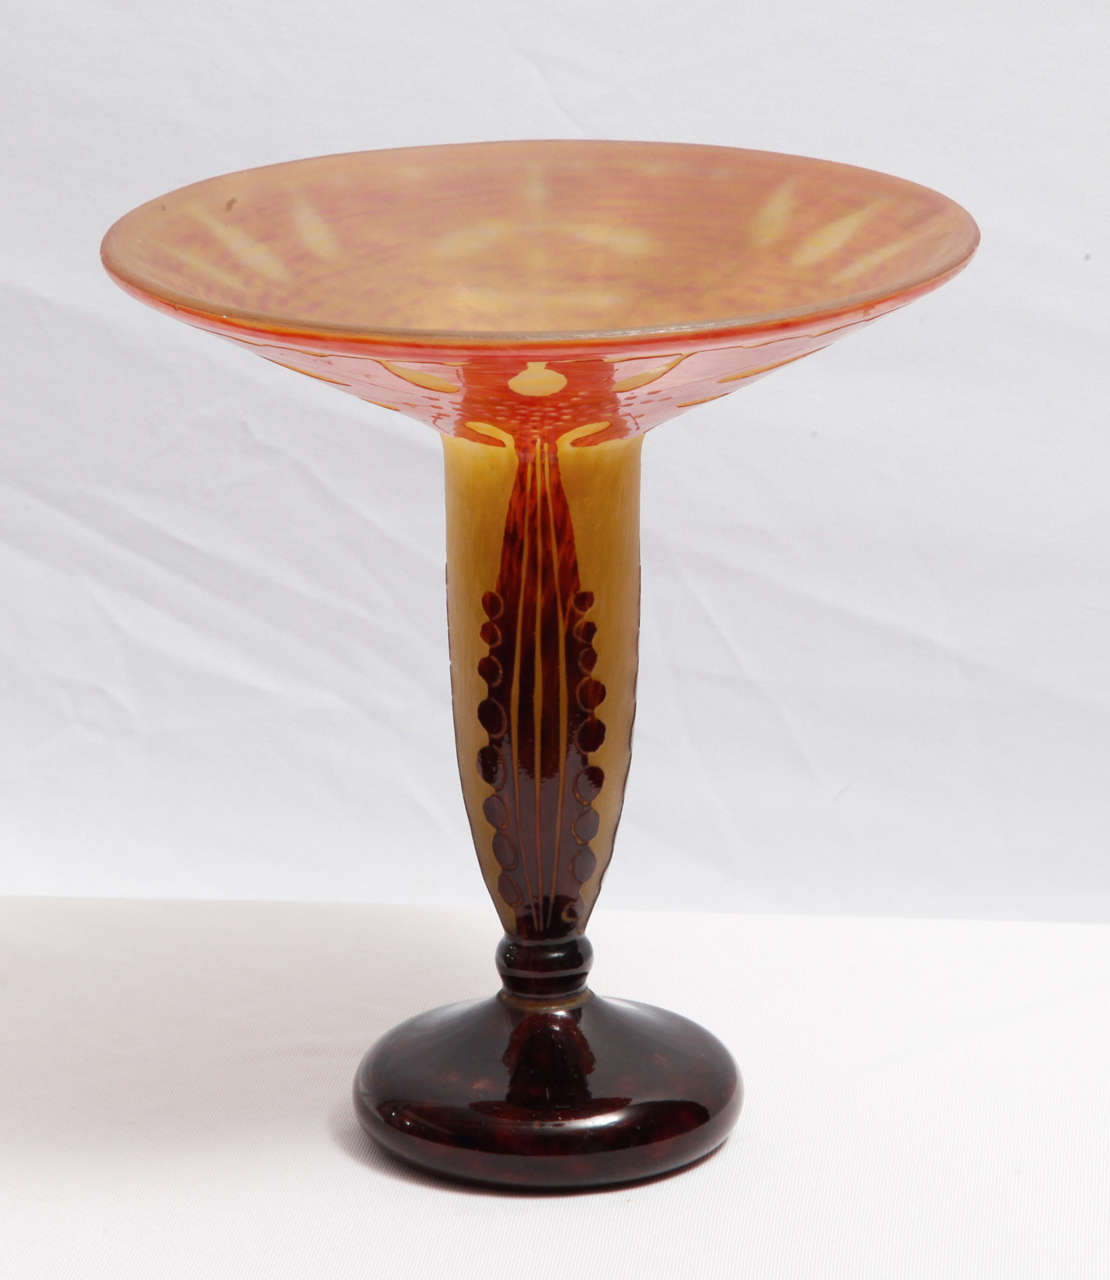 Elegant glass foot vase on a foot executed by 'Le Verre Français' the famous brand of the French designer Charles Schneider.
Cameo (etched and curved) 'Amaranthe' pattern decor in fused layers of red, purple and yellow glass. Engraved signature on